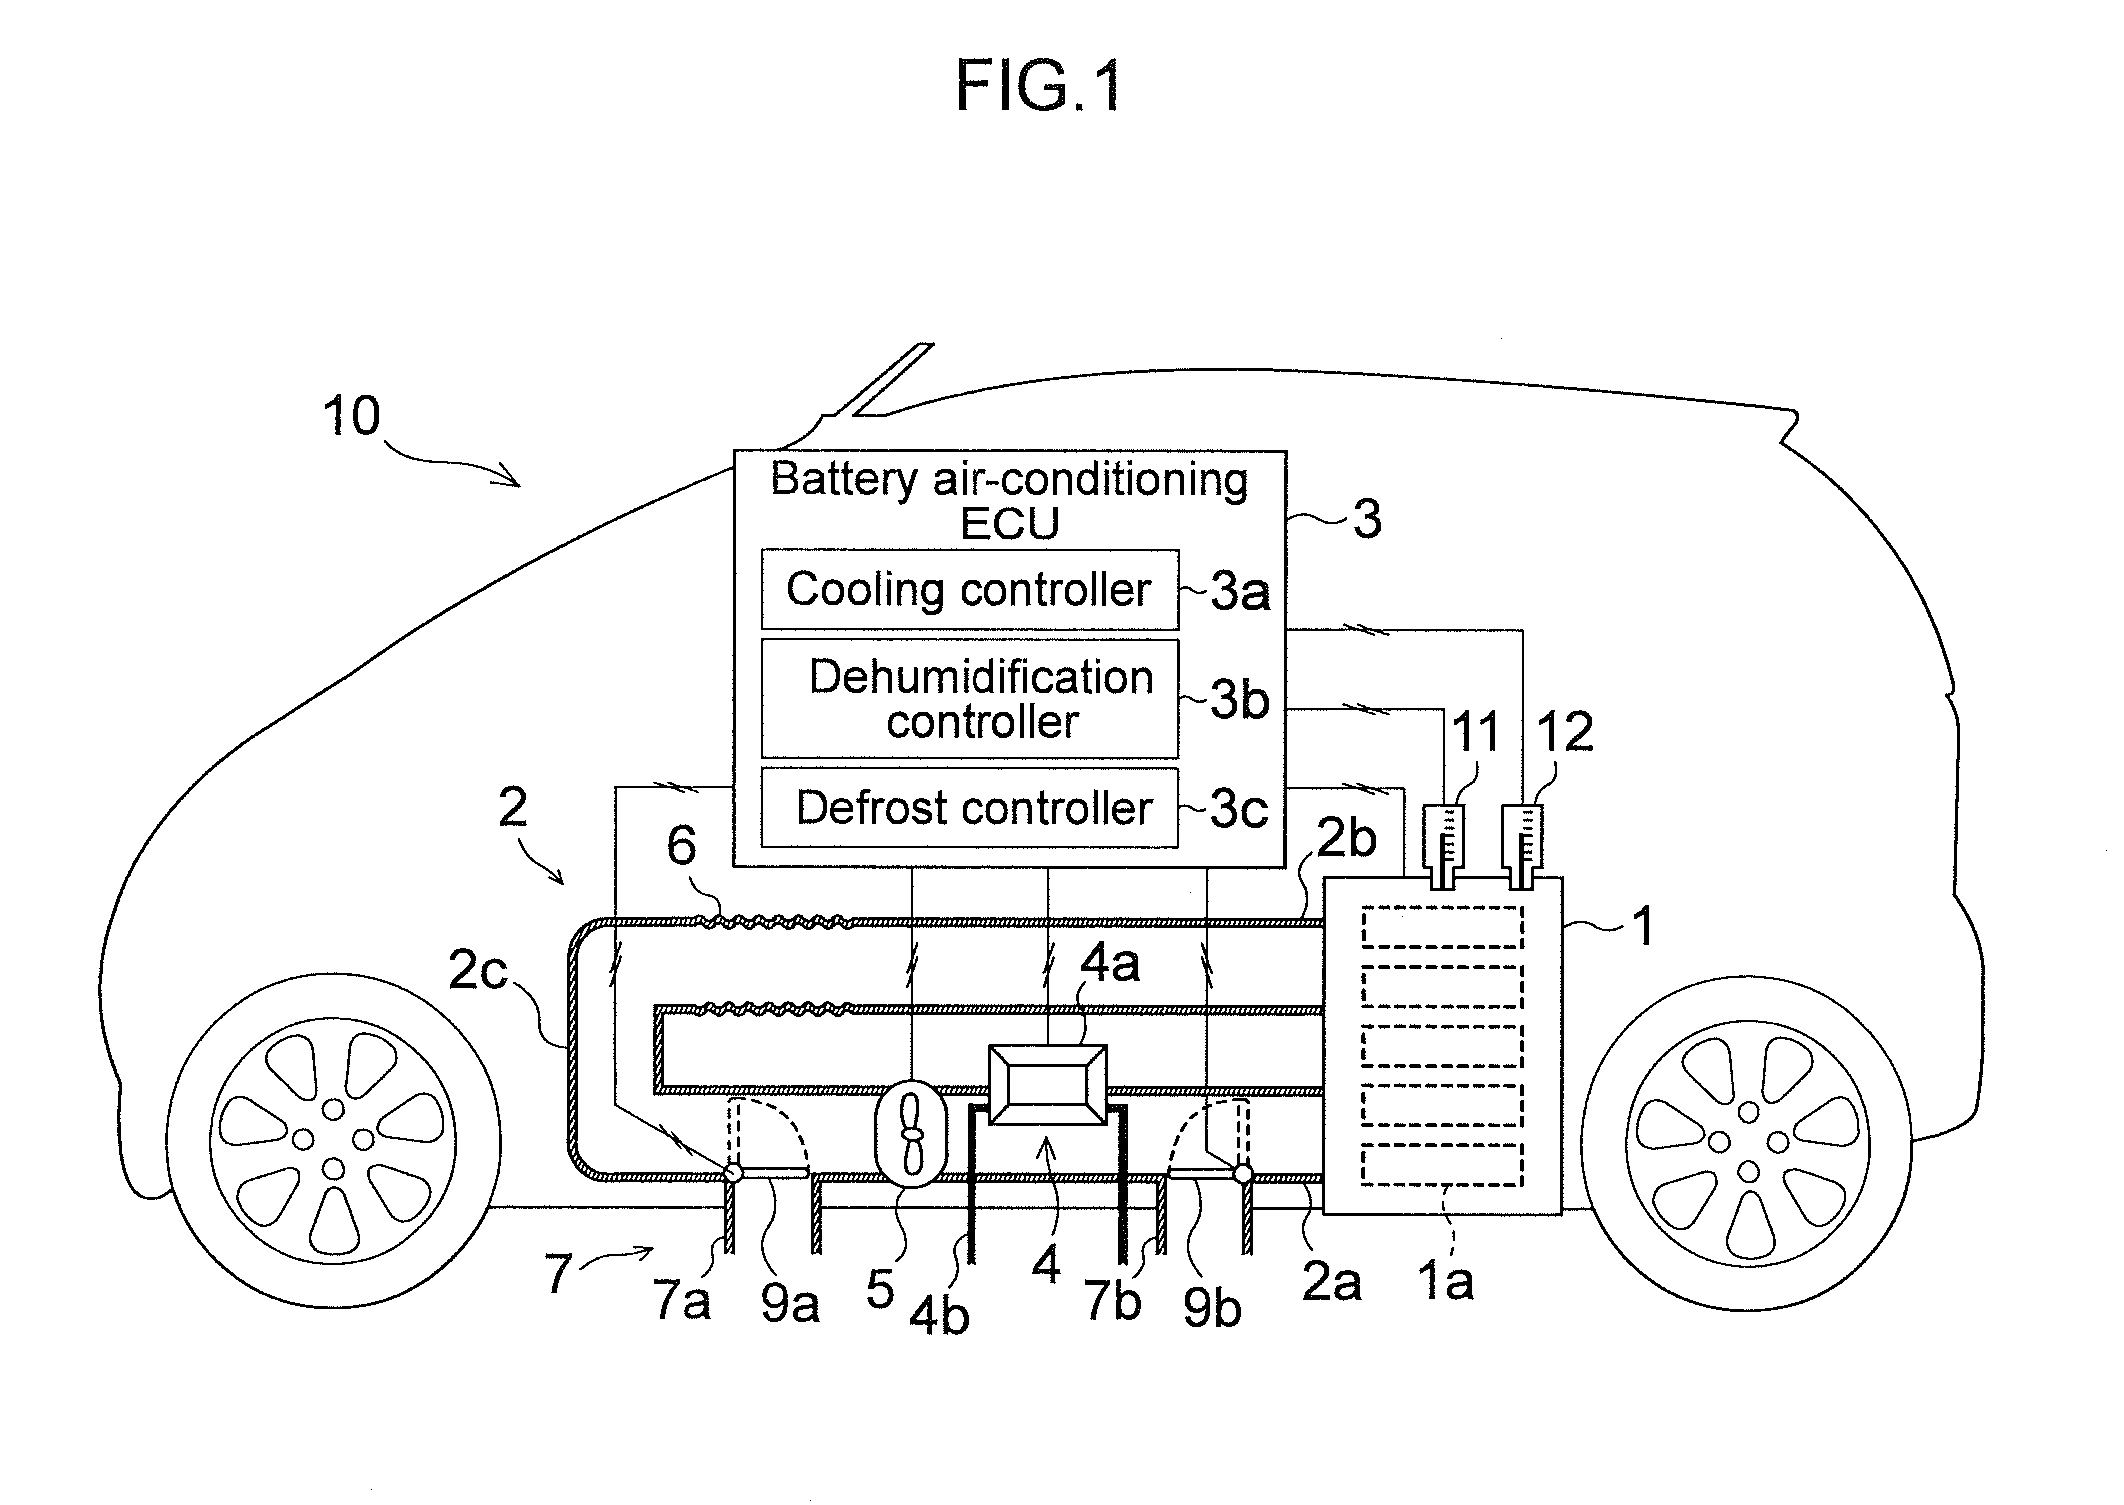 Air-conditioning controlling apparatus for a battery pack